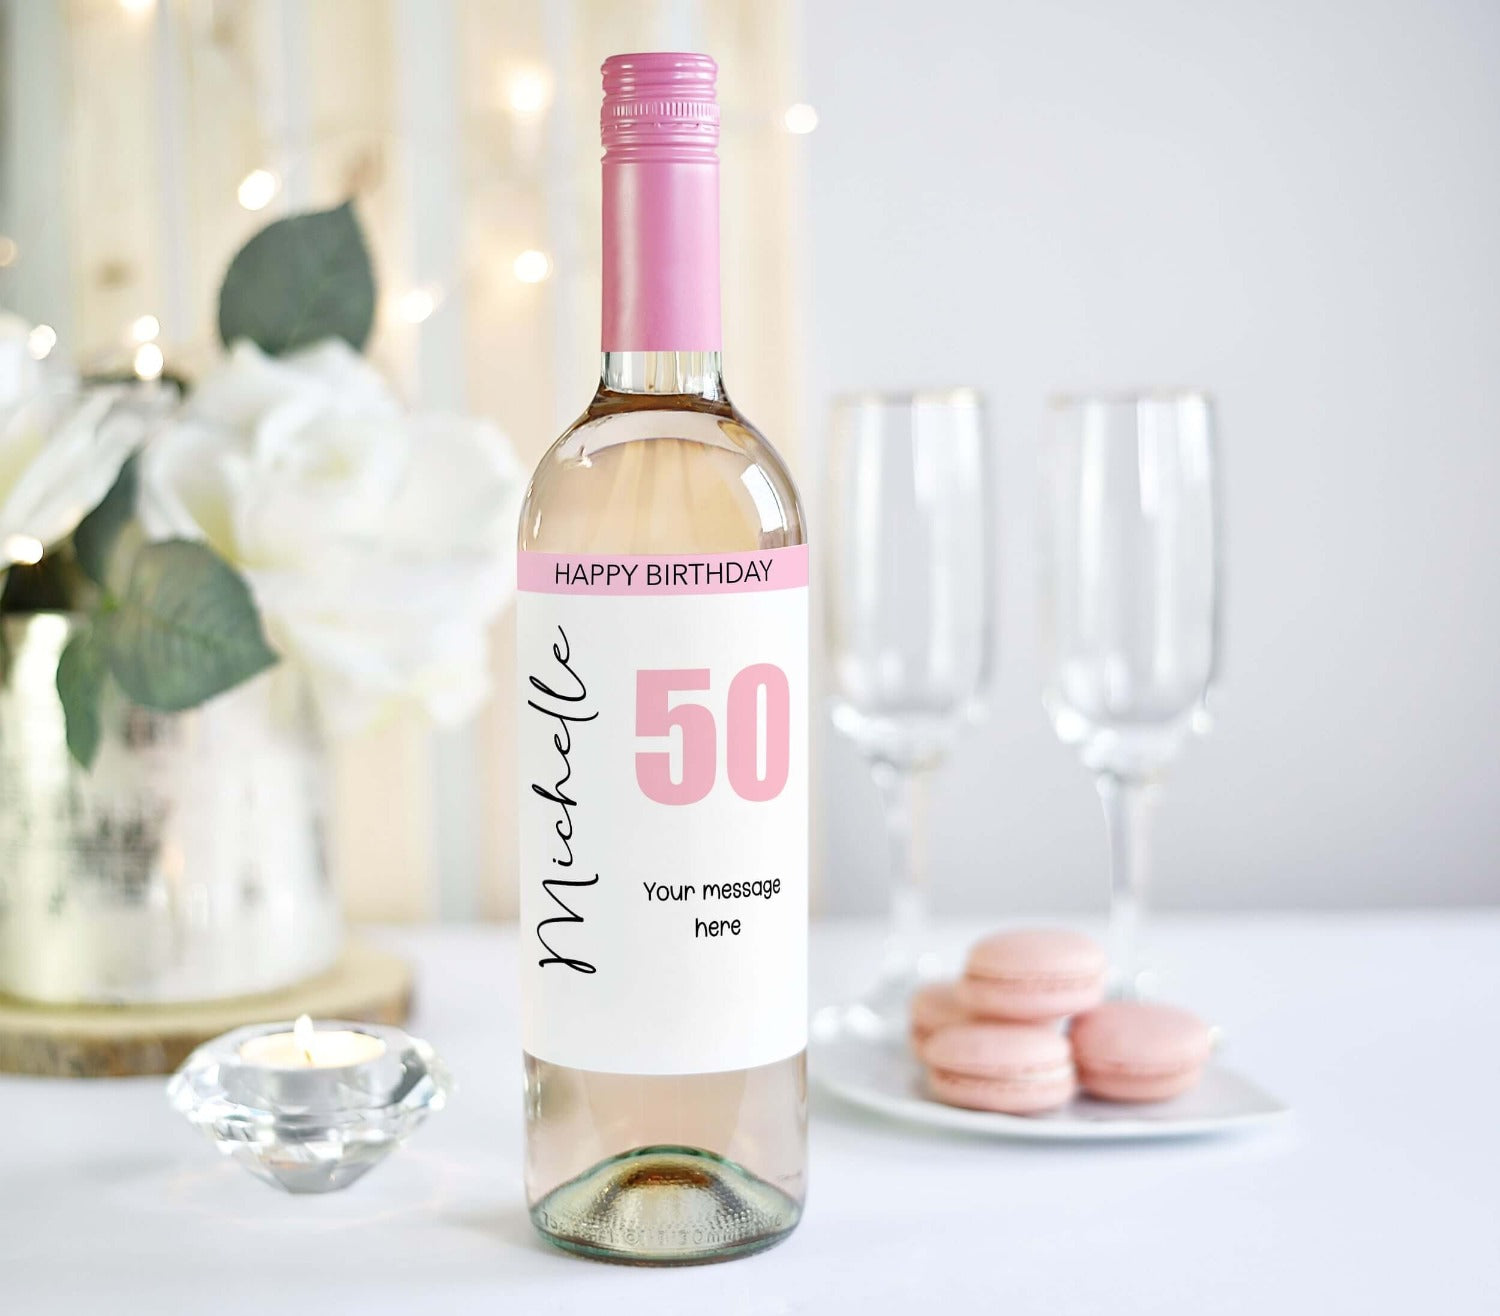 personalised wine bottle label with name and message - happy 50th birthday